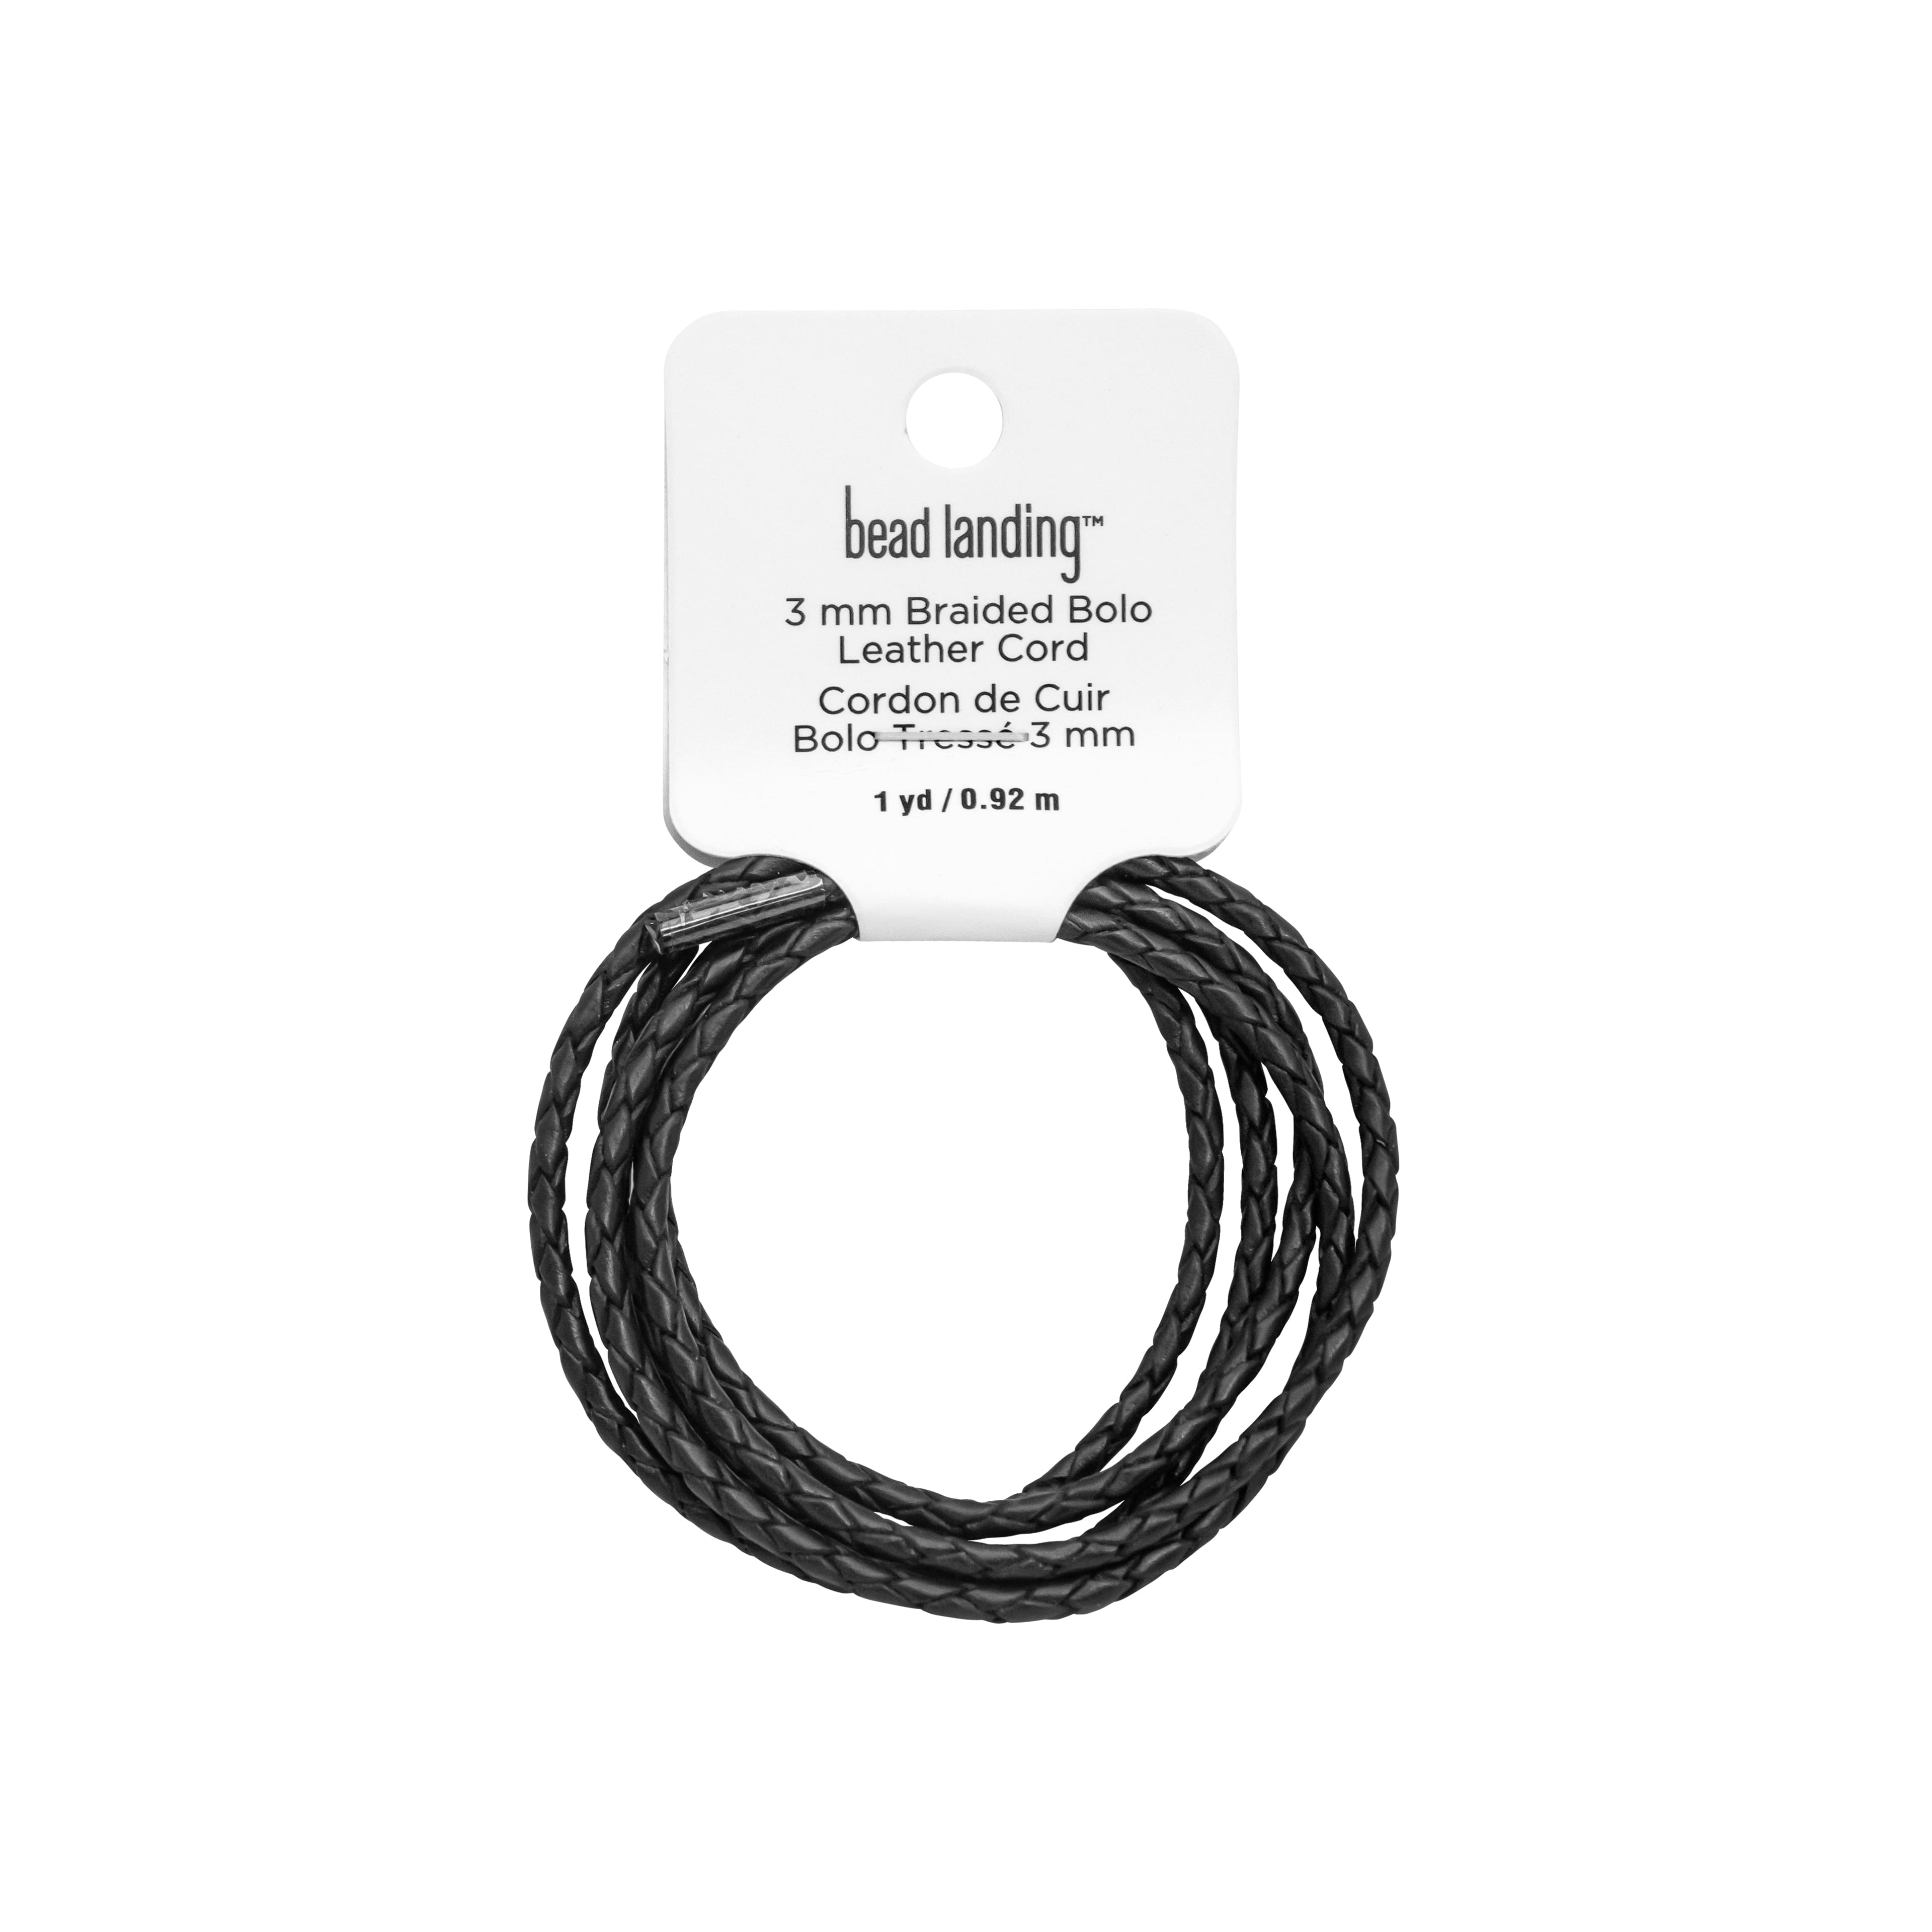 5mm Black Braided Bolo Leather Cord by Bead Landing™